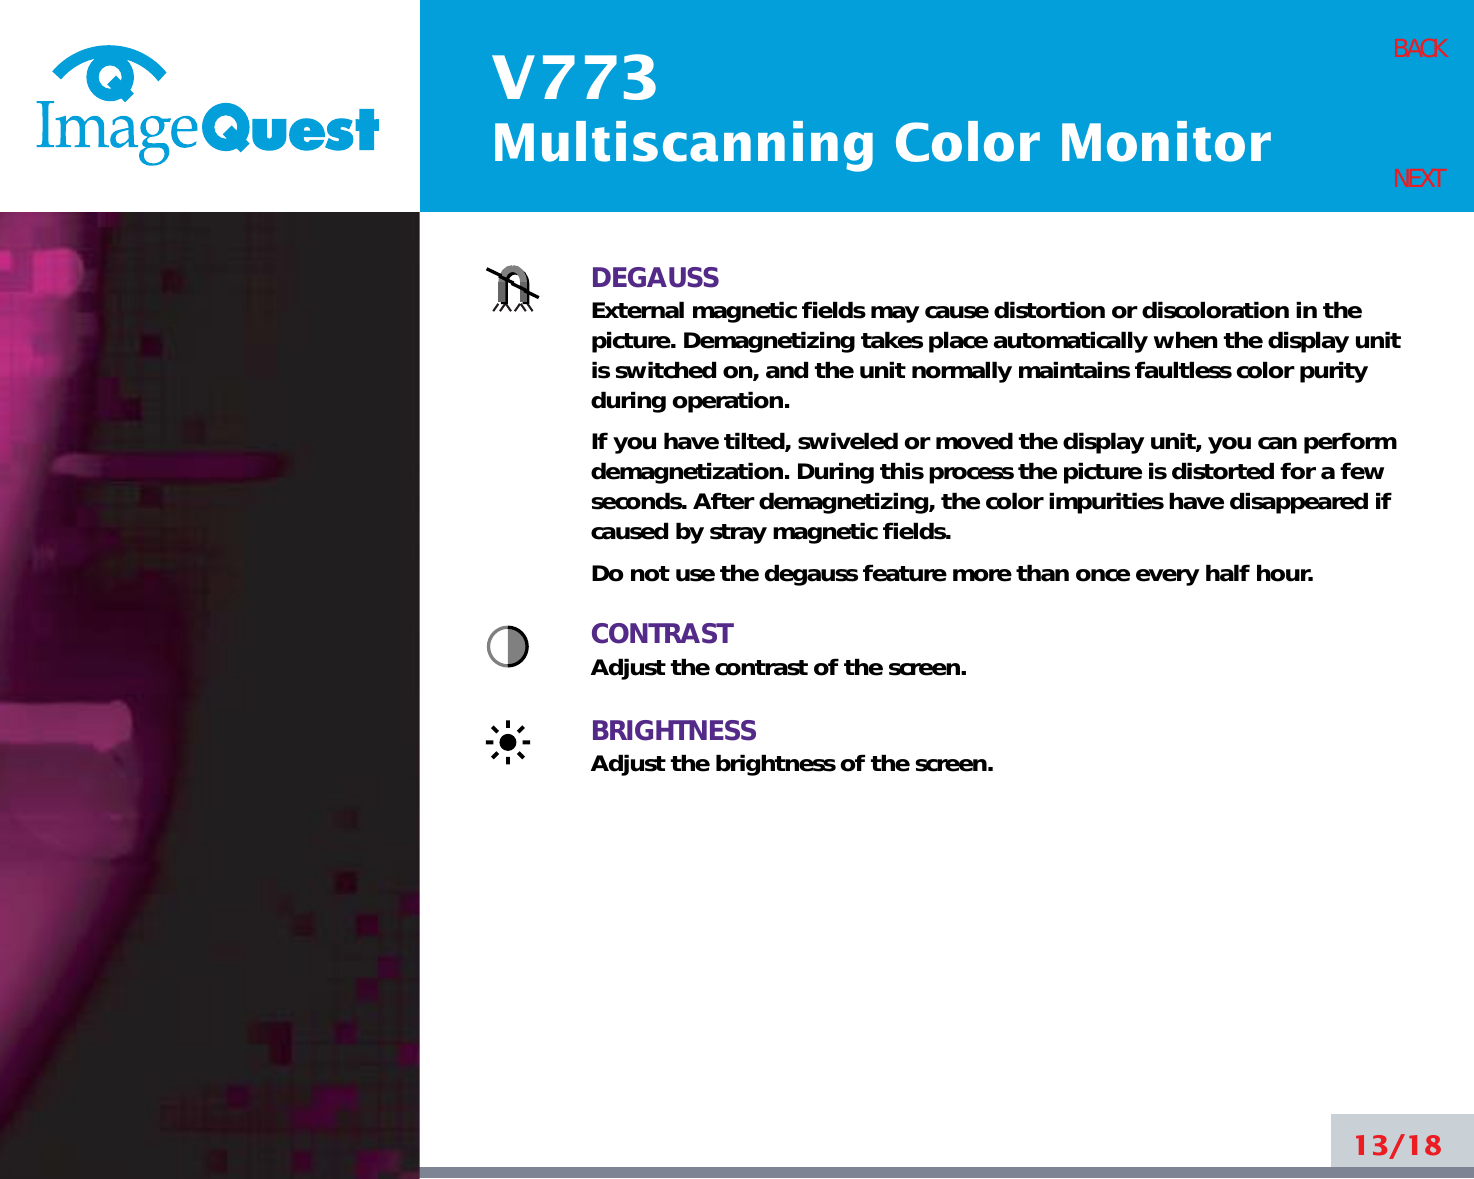 V773Multiscanning Color Monitor13/18BACKNEXTDEGAUSSExternal magnetic fields may cause distortion or discoloration in thepicture. Demagnetizing takes place automatically when the display unitis switched on, and the unit normally maintains faultless color purityduring operation.If you have tilted, swiveled or moved the display unit, you can performdemagnetization. During this process the picture is distorted for a fewseconds. After demagnetizing, the color impurities have disappeared ifcaused by stray magnetic fields. Do not use the degauss feature more than once every half hour.CONTRASTAdjust the contrast of the screen.BRIGHTNESSAdjust the brightness of the screen.